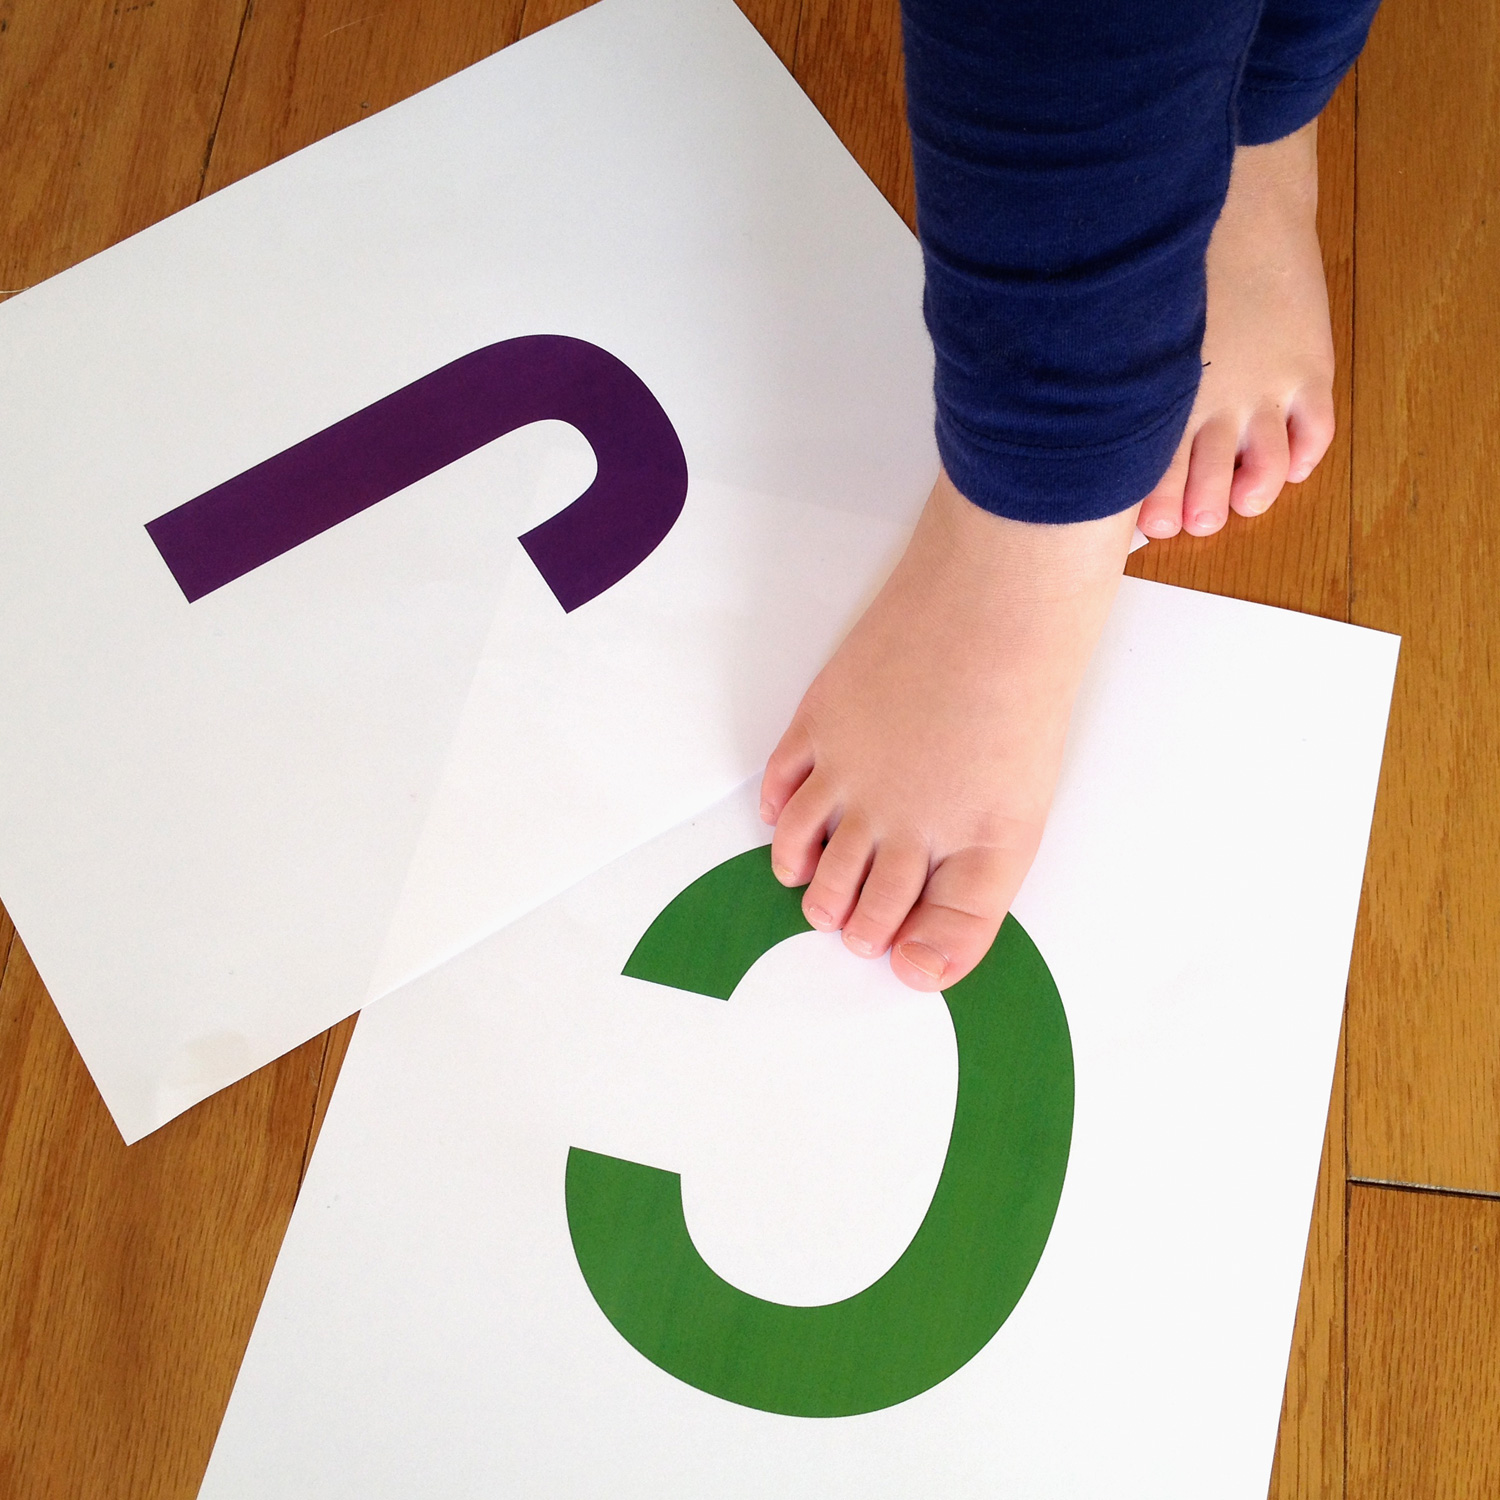 Letter knowledge games for two-year-olds, designed by education experts.